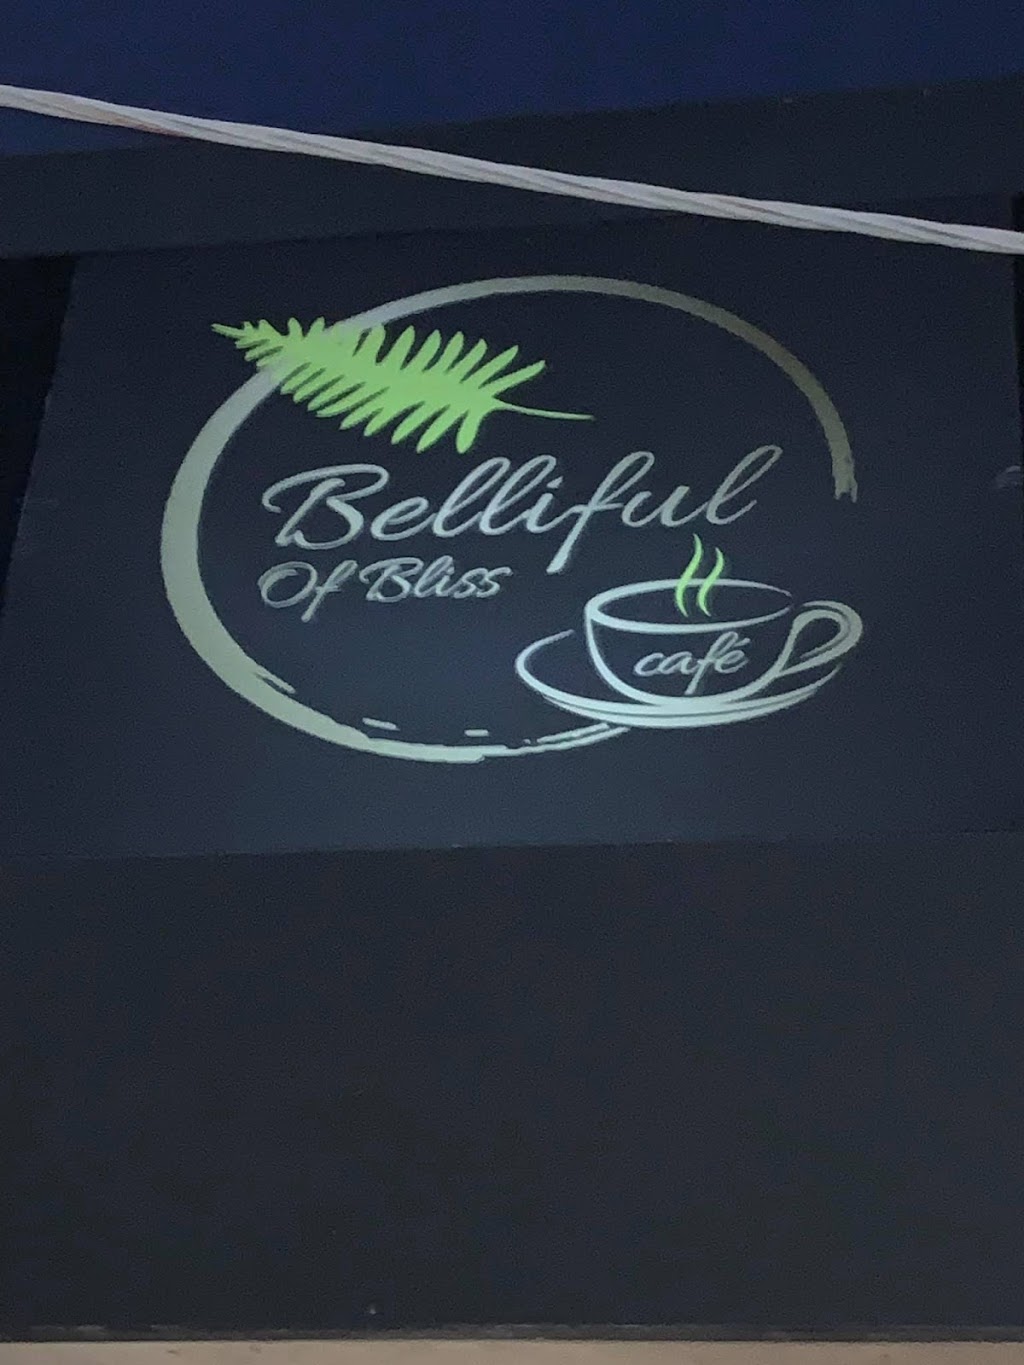 Belliful Of Bliss Cafe | cafe | 17 Bayview Rd, Belgrave VIC 3160, Australia | 0414090852 OR +61 414 090 852